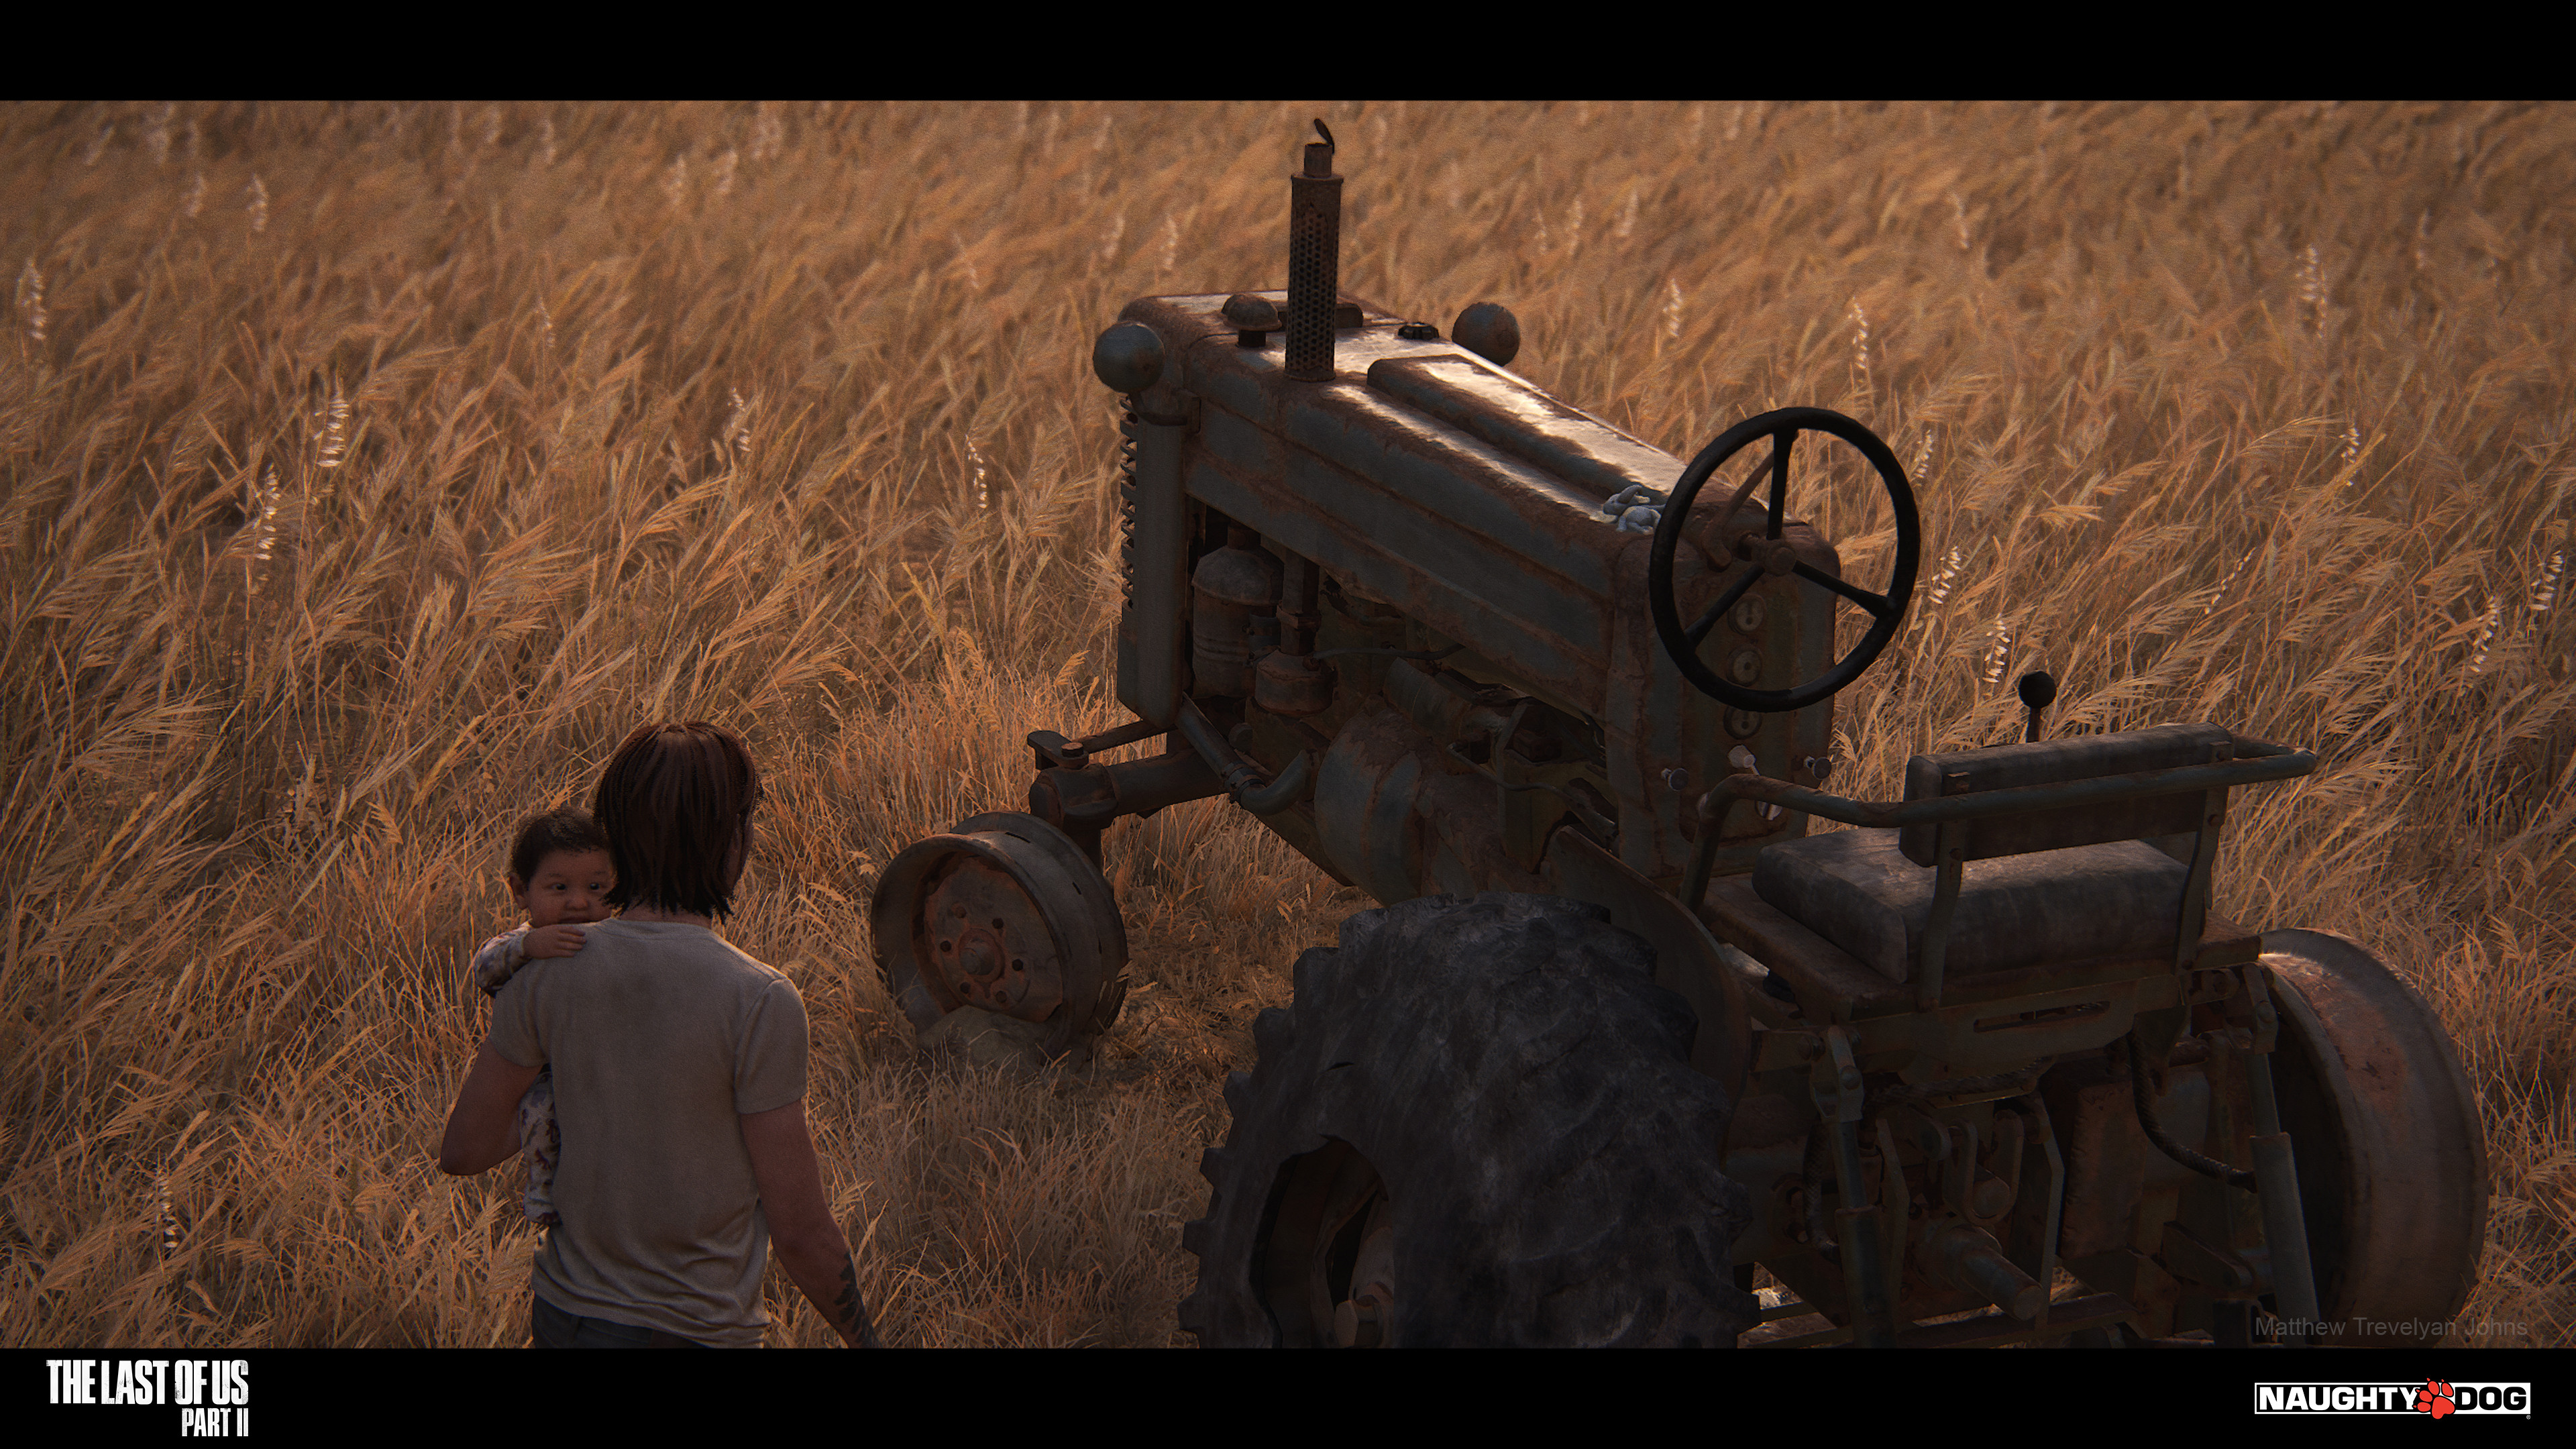 Tiffany, Reuben and Joakim did beautiful work in the farm area, my small contribution was to dictate the asset pipeline for the tractor and to create and refine its final shader appearance